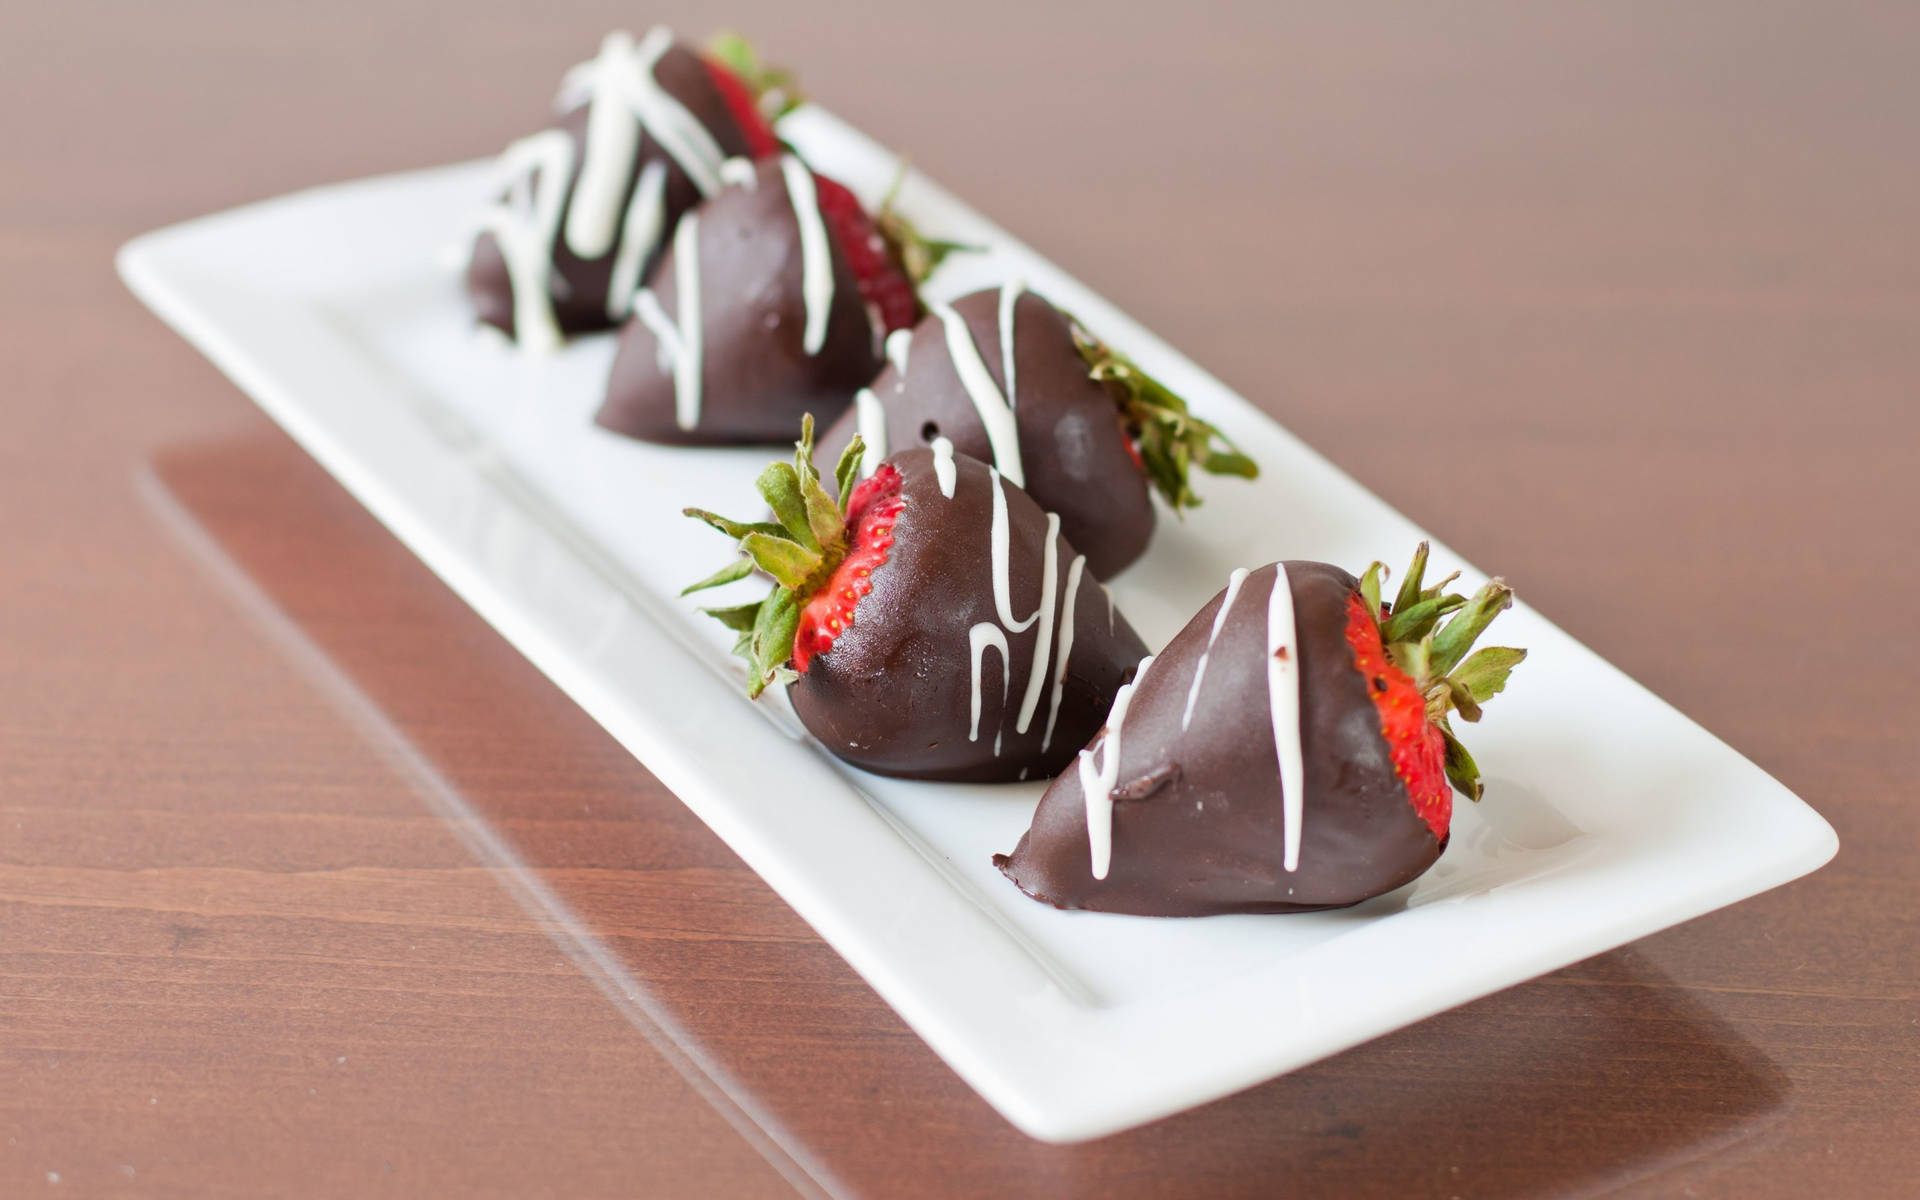 Caption: Delightful Chocolate Dipped Strawberries Wallpaper